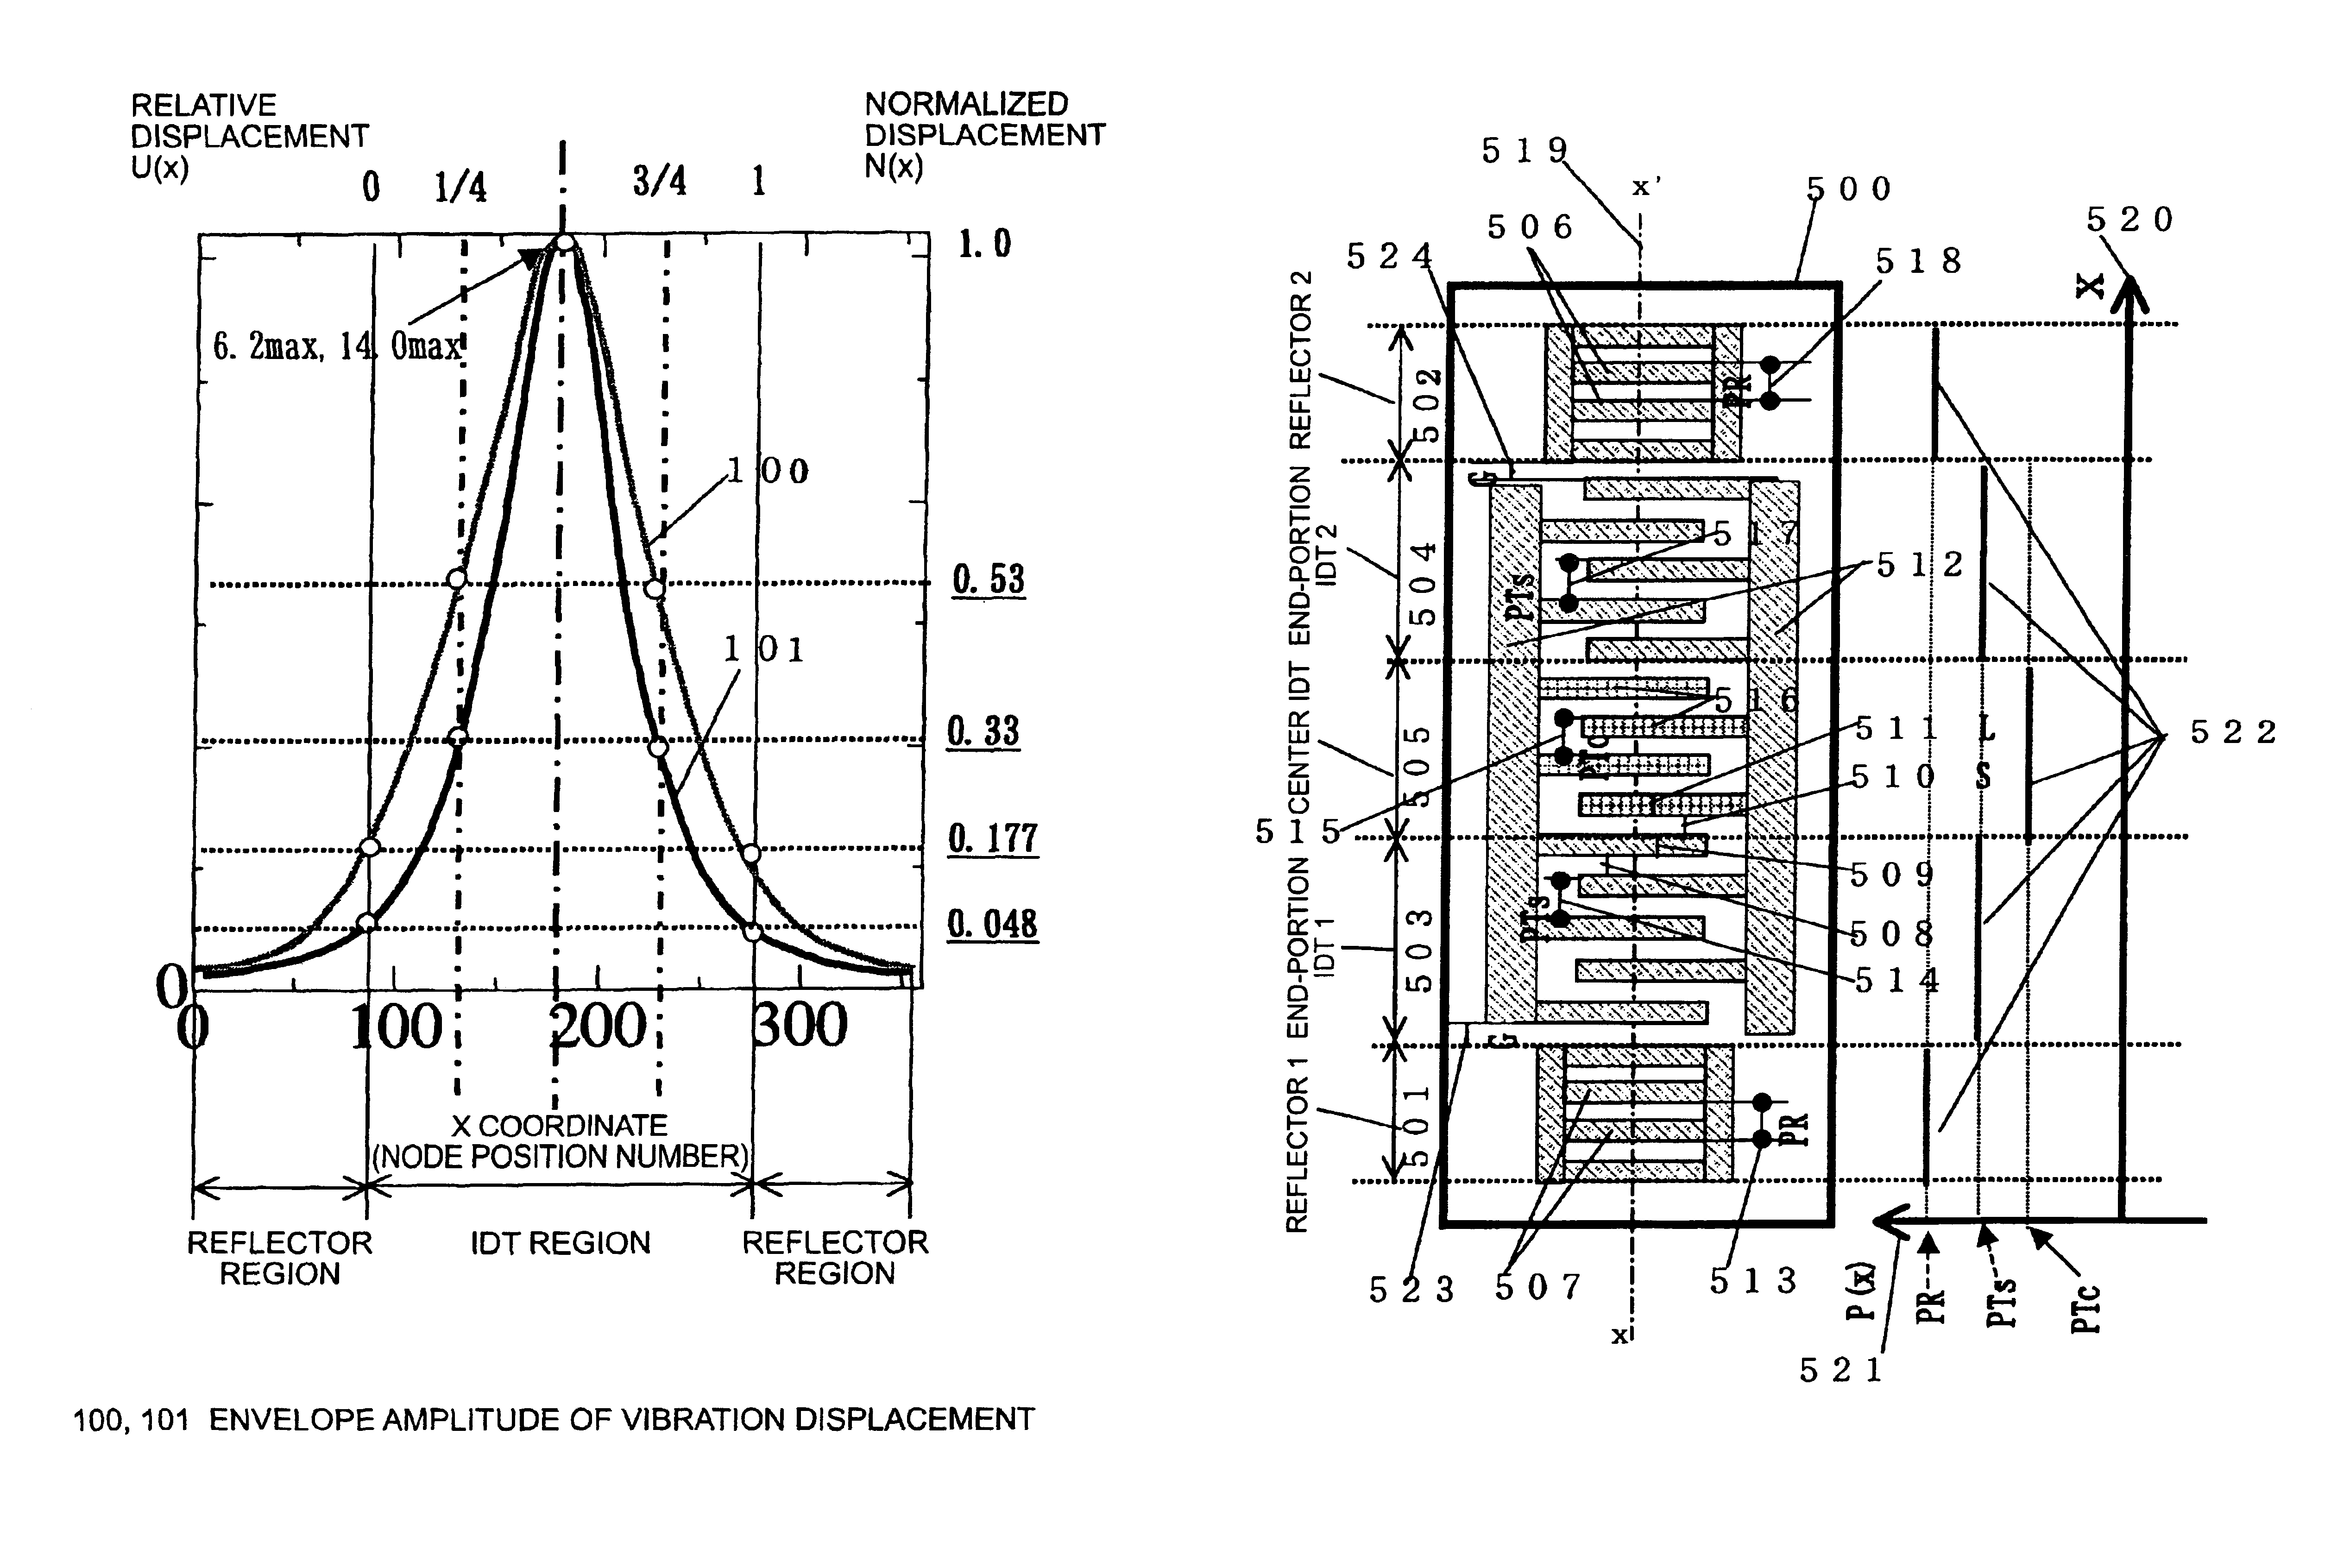 Surface acoustic wave resonator with an interdigital transducer divided into regions having a different fixed pitch